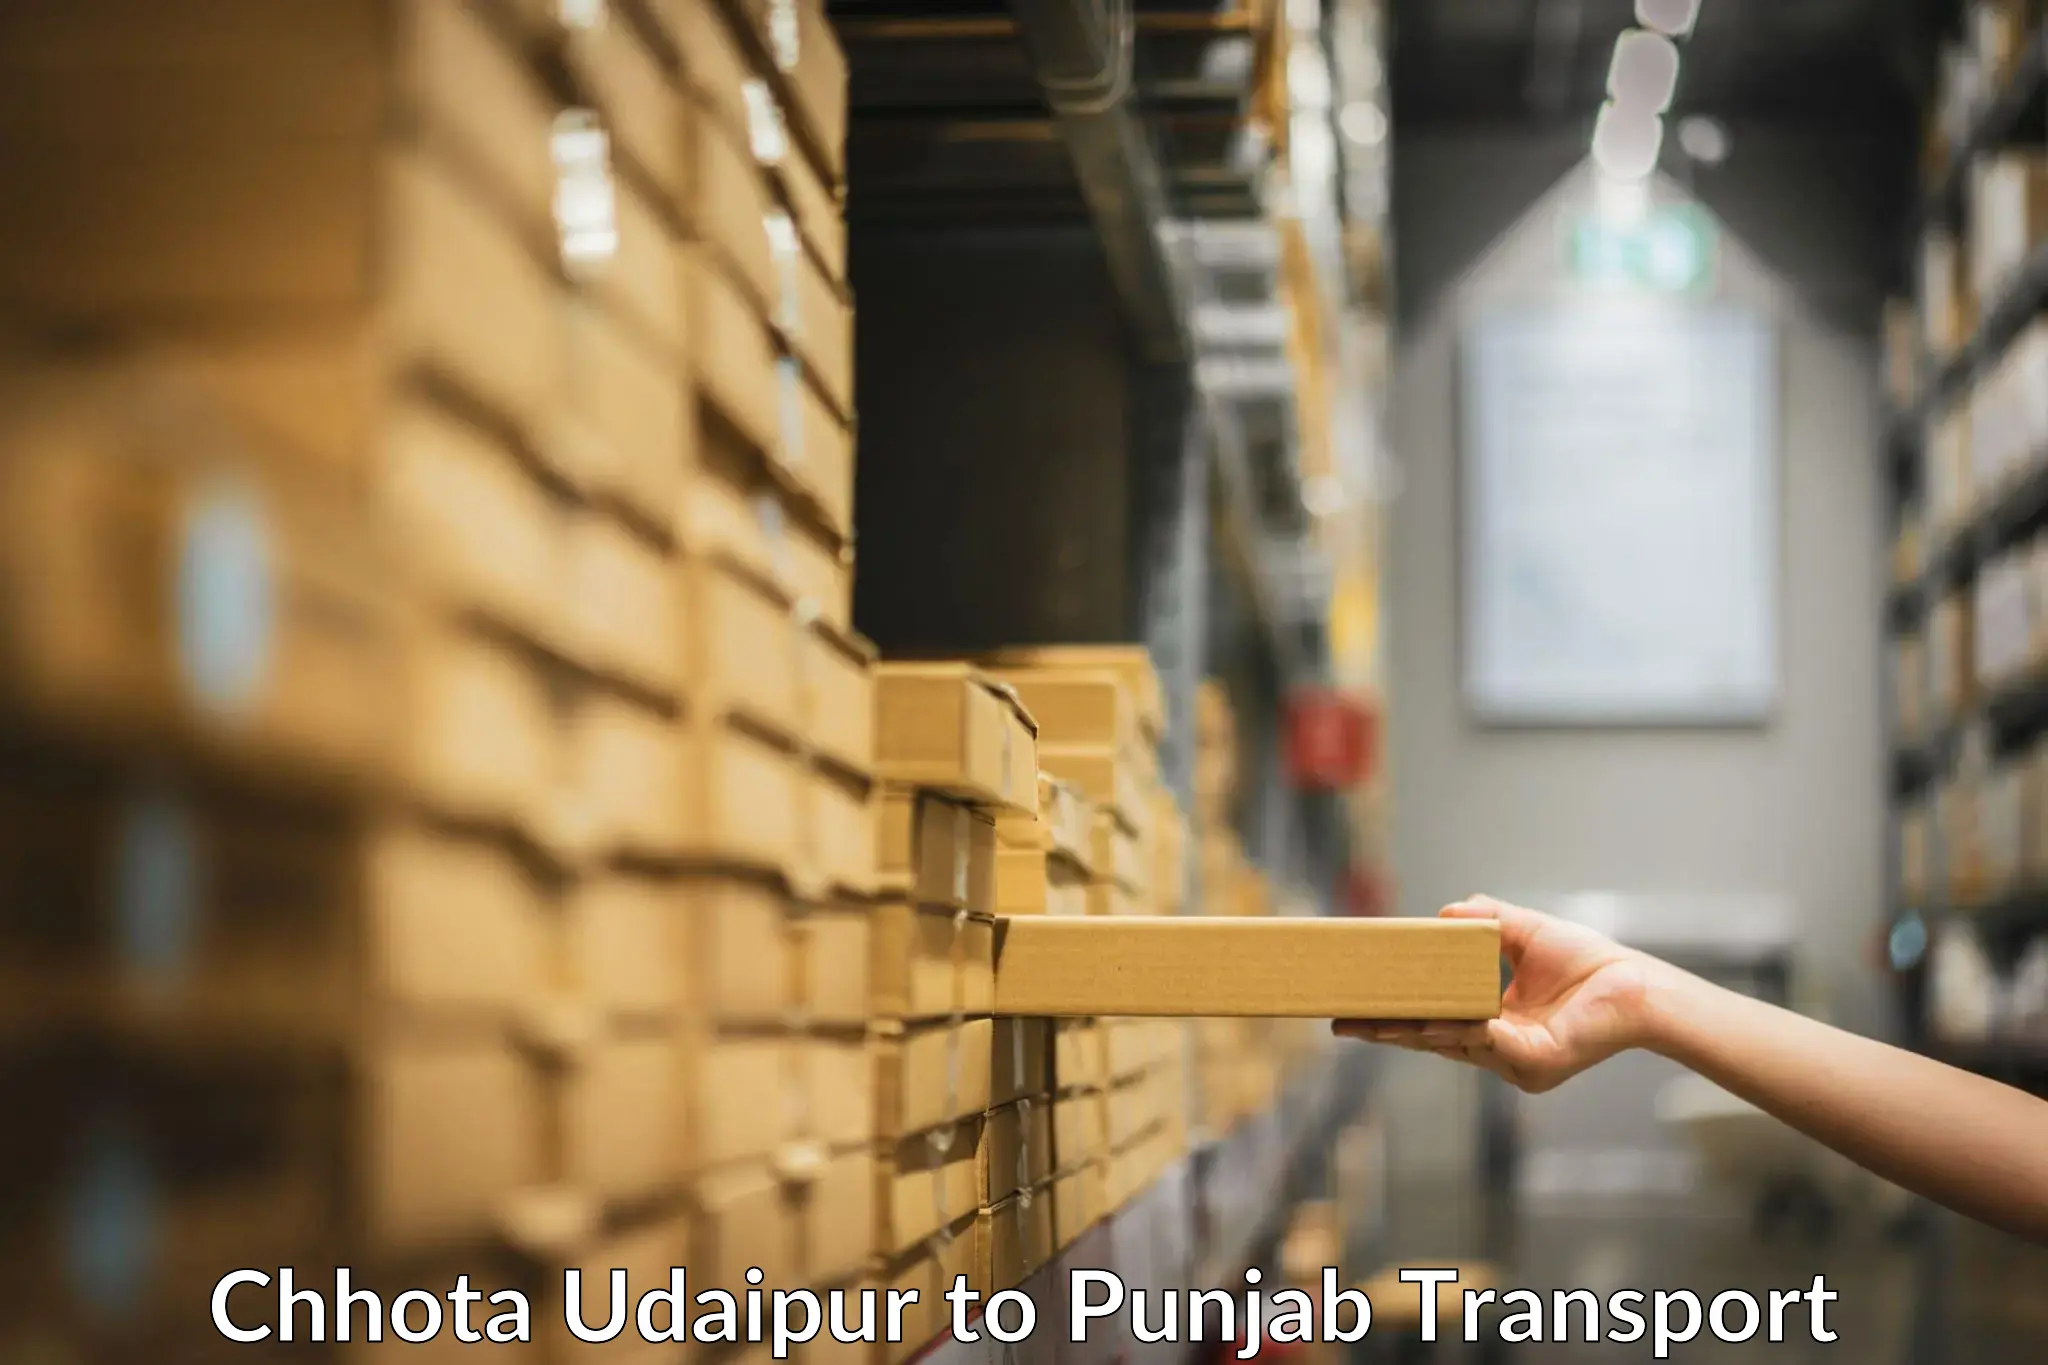 Commercial transport service Chhota Udaipur to IIT Ropar